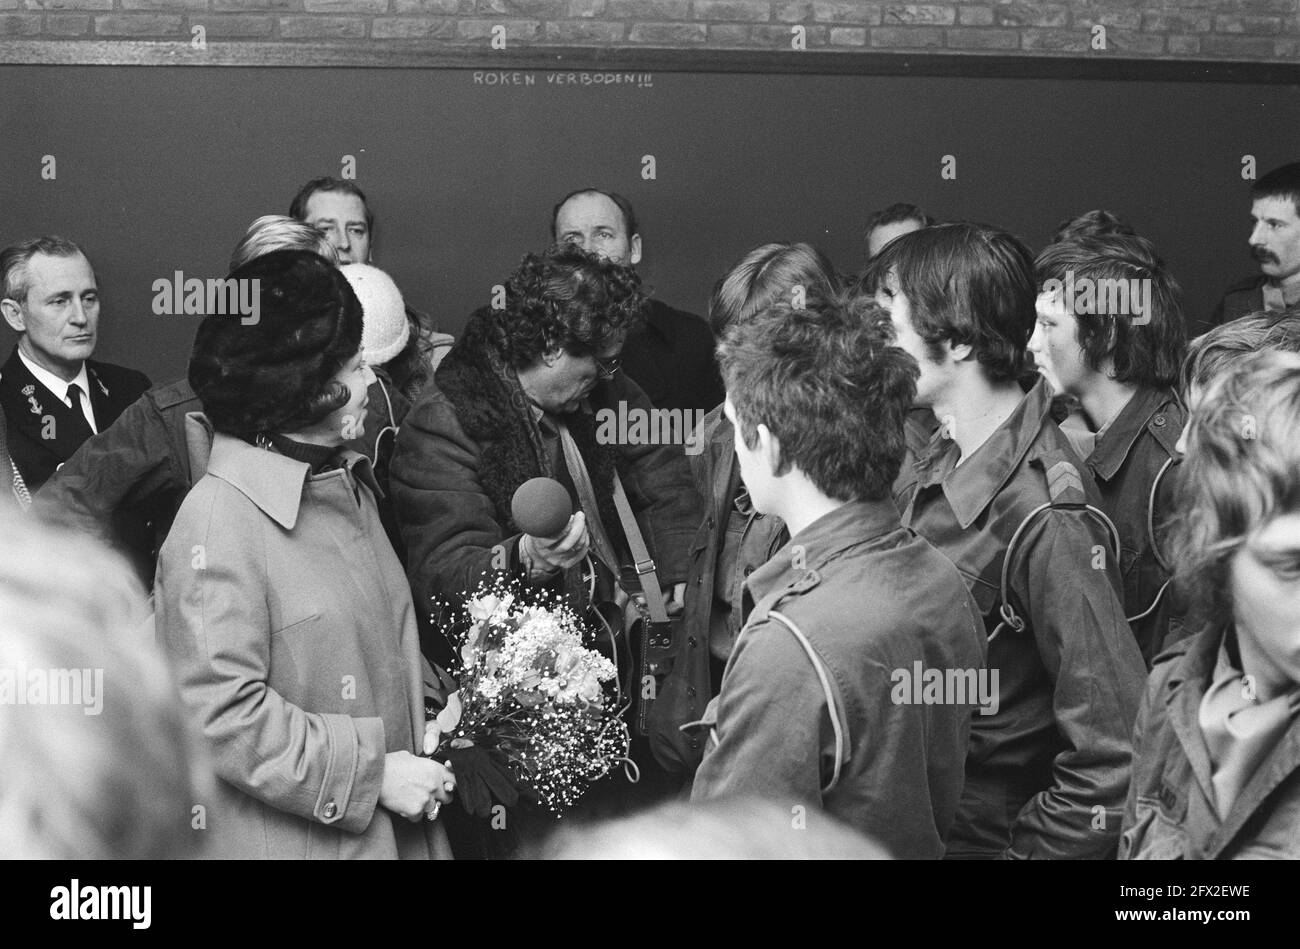 Princess Beatrix speaks to military, February 22, 1979, visits, barracks, princesses, peacekeeping missions, The Netherlands, 20th century press agency photo, news to remember, documentary, historic photography 1945-1990, visual stories, human history of the Twentieth Century, capturing moments in time Stock Photo